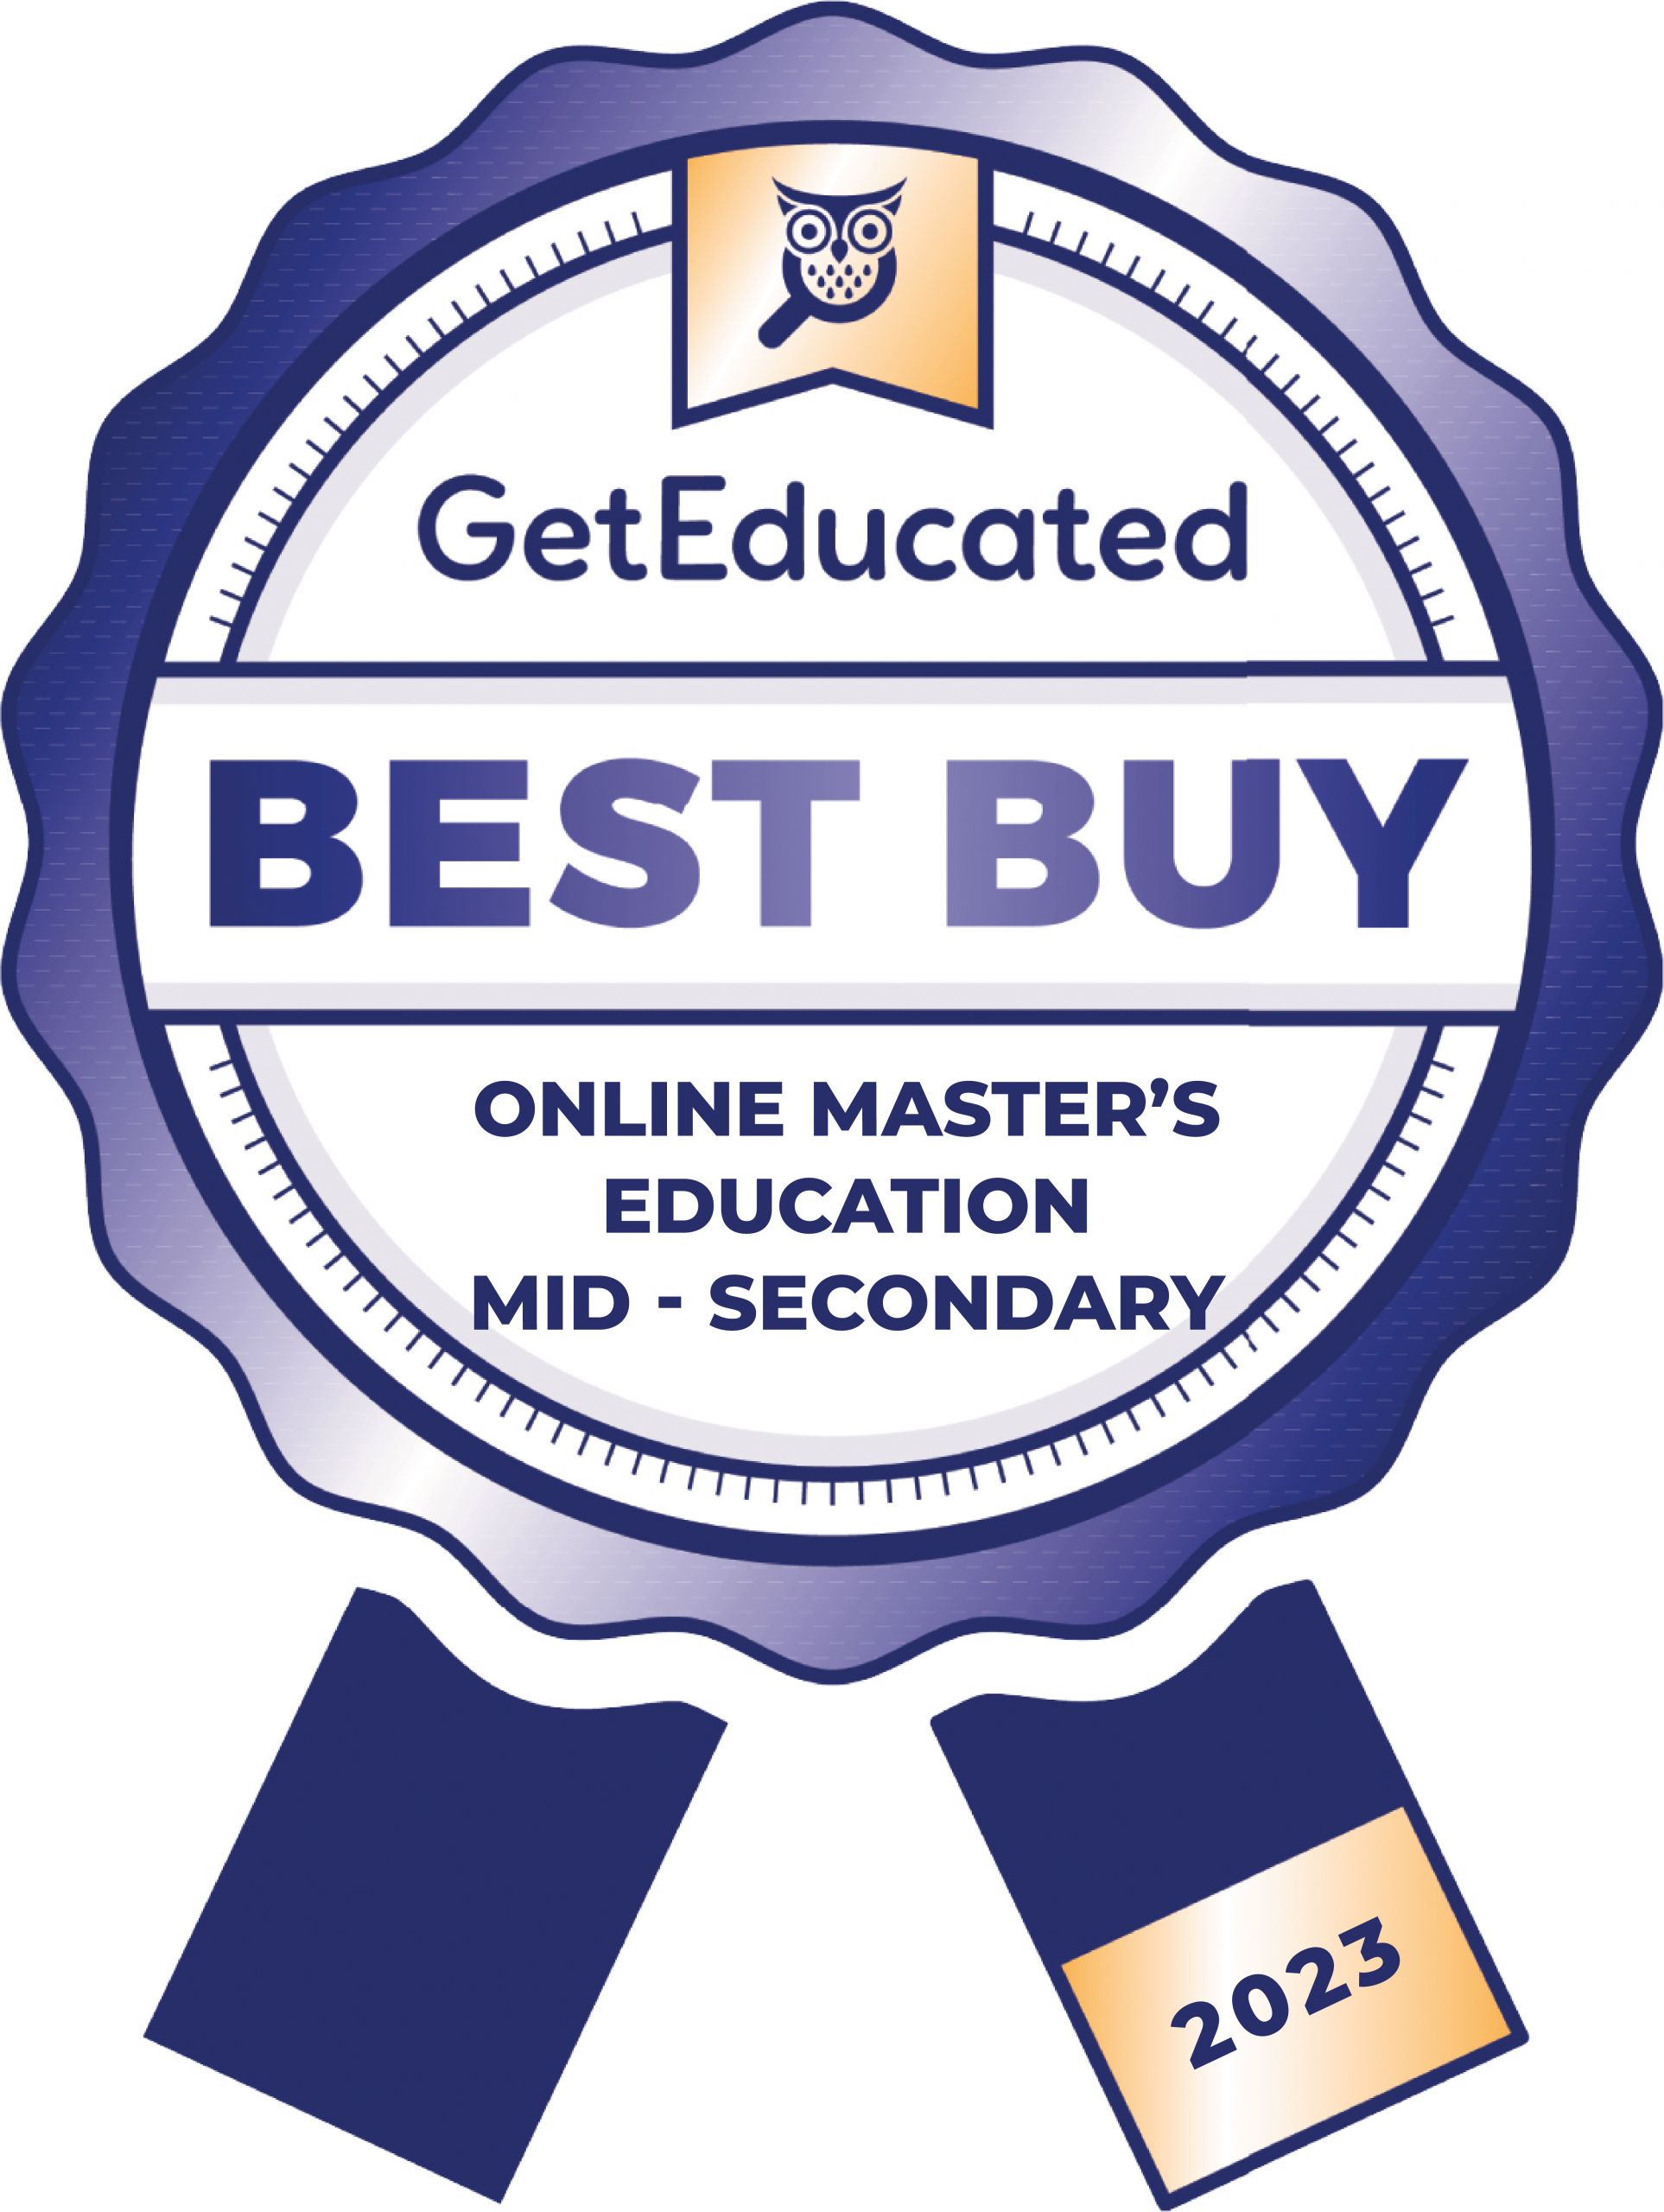 Rankings for the cheapest online master's in education